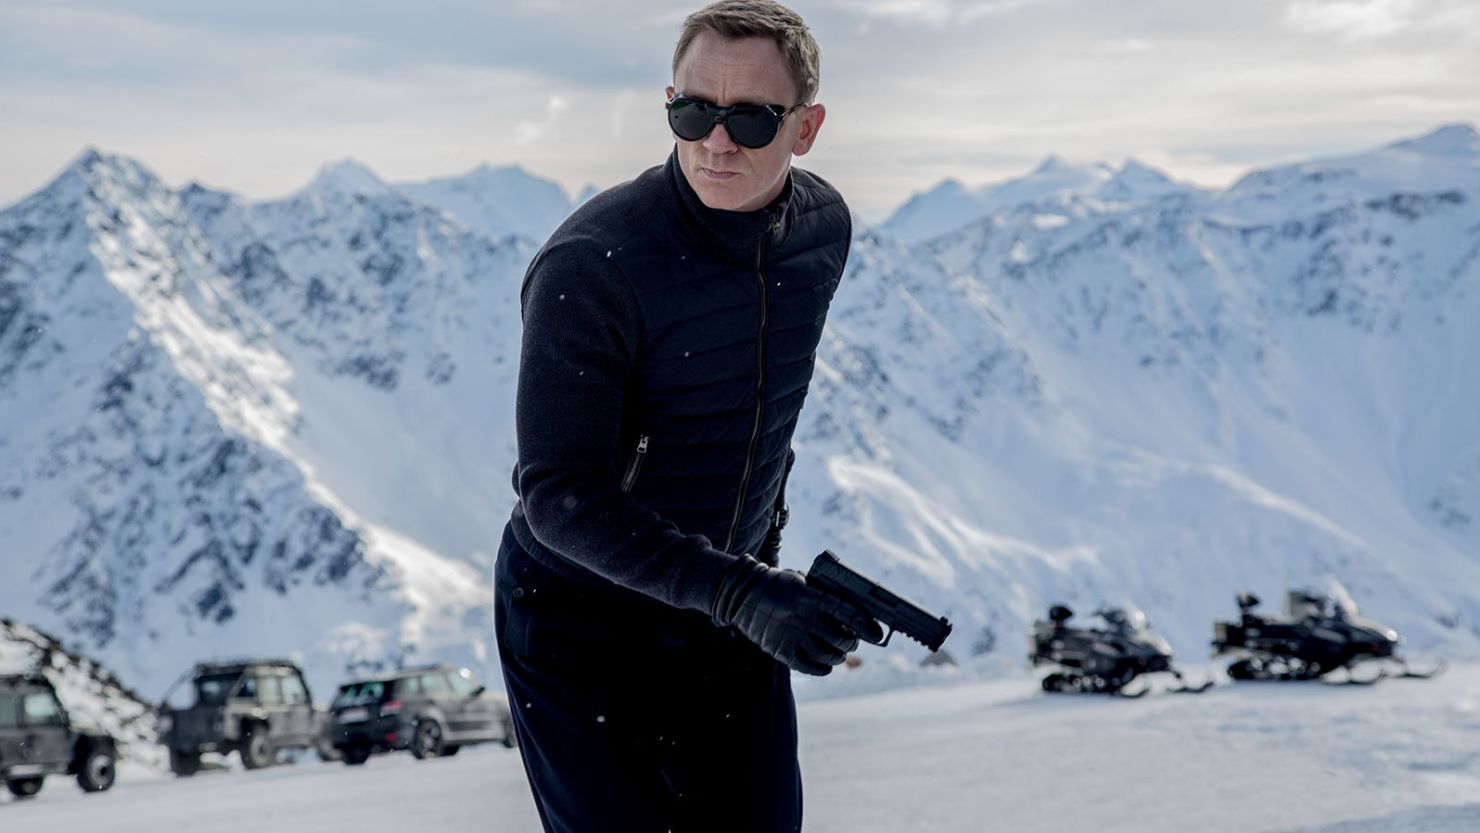 The camera was found in the toilets at Pinewood Studios, where "Bond 25" is currently filming.